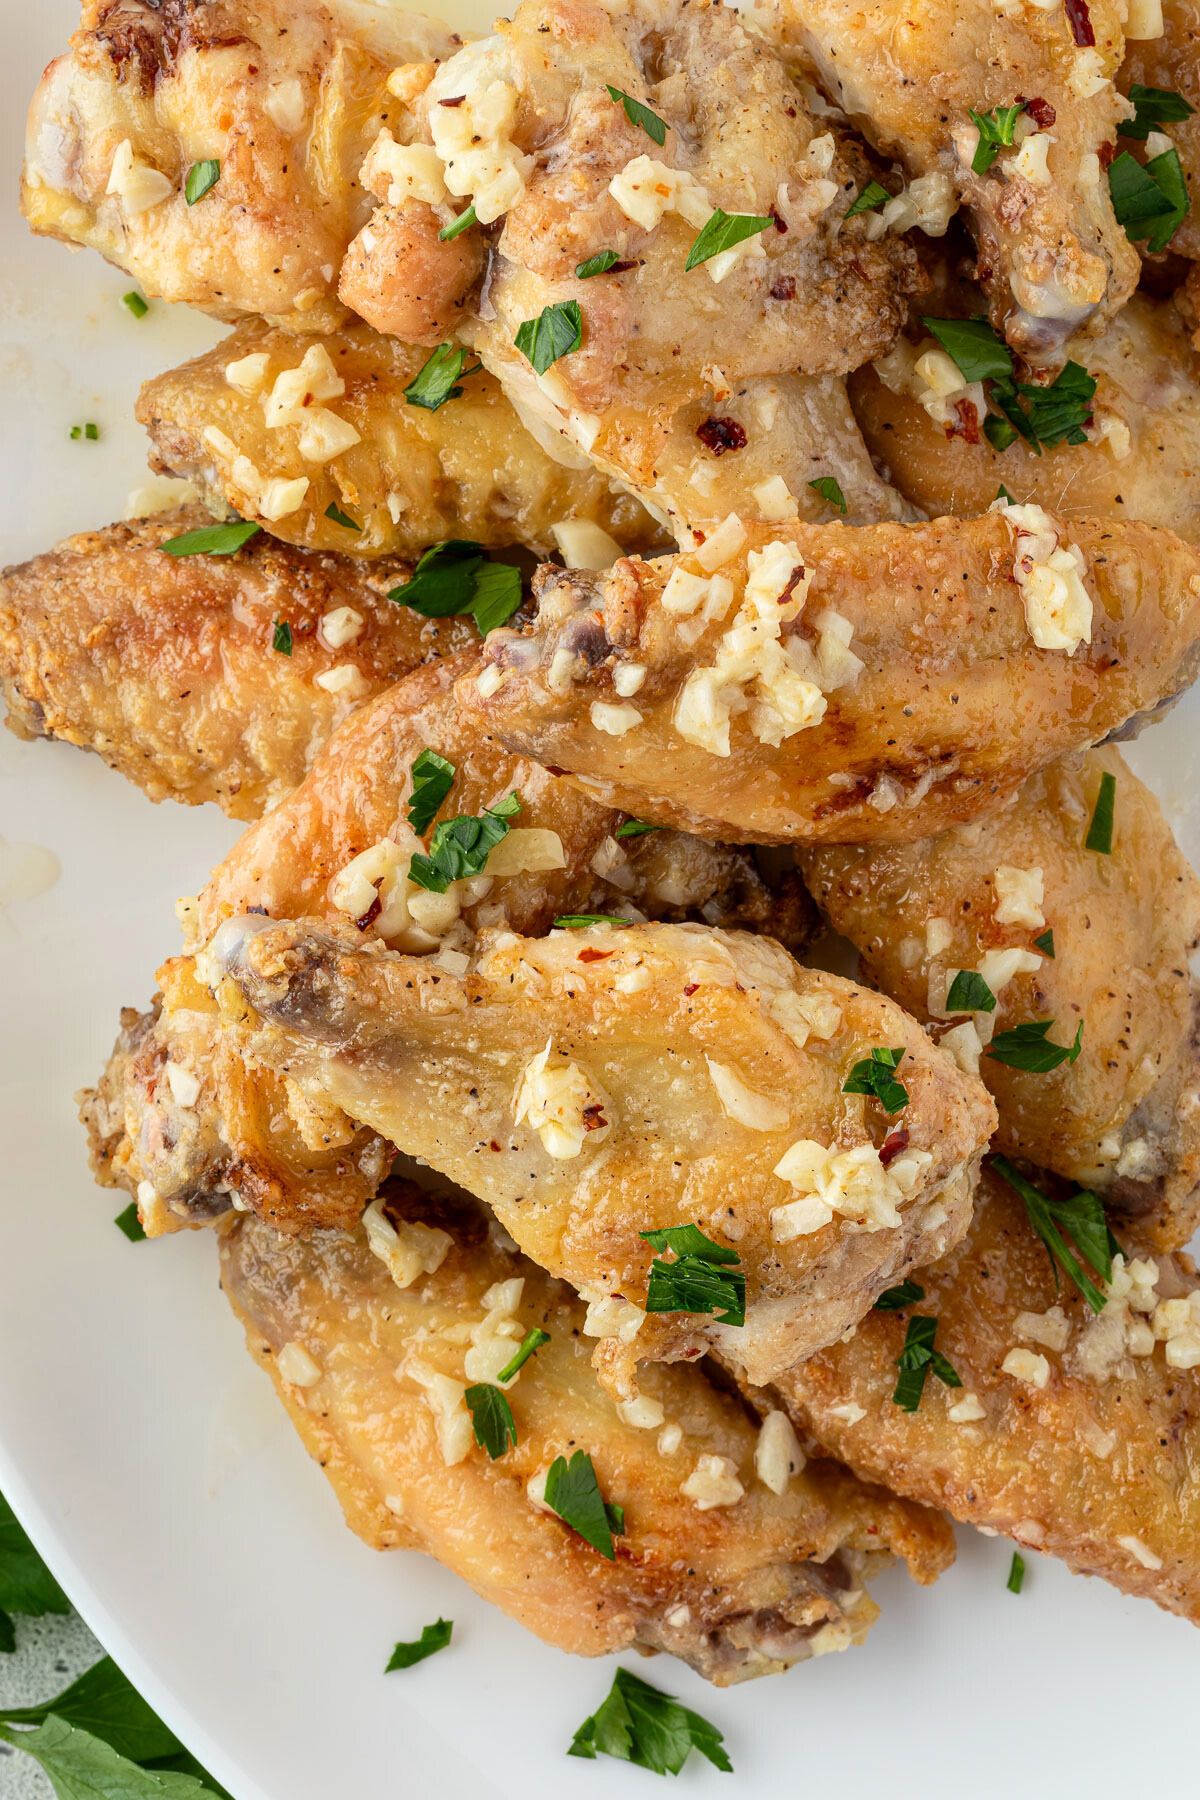 Platter of golden brown chicken wings topped with garlic butter.